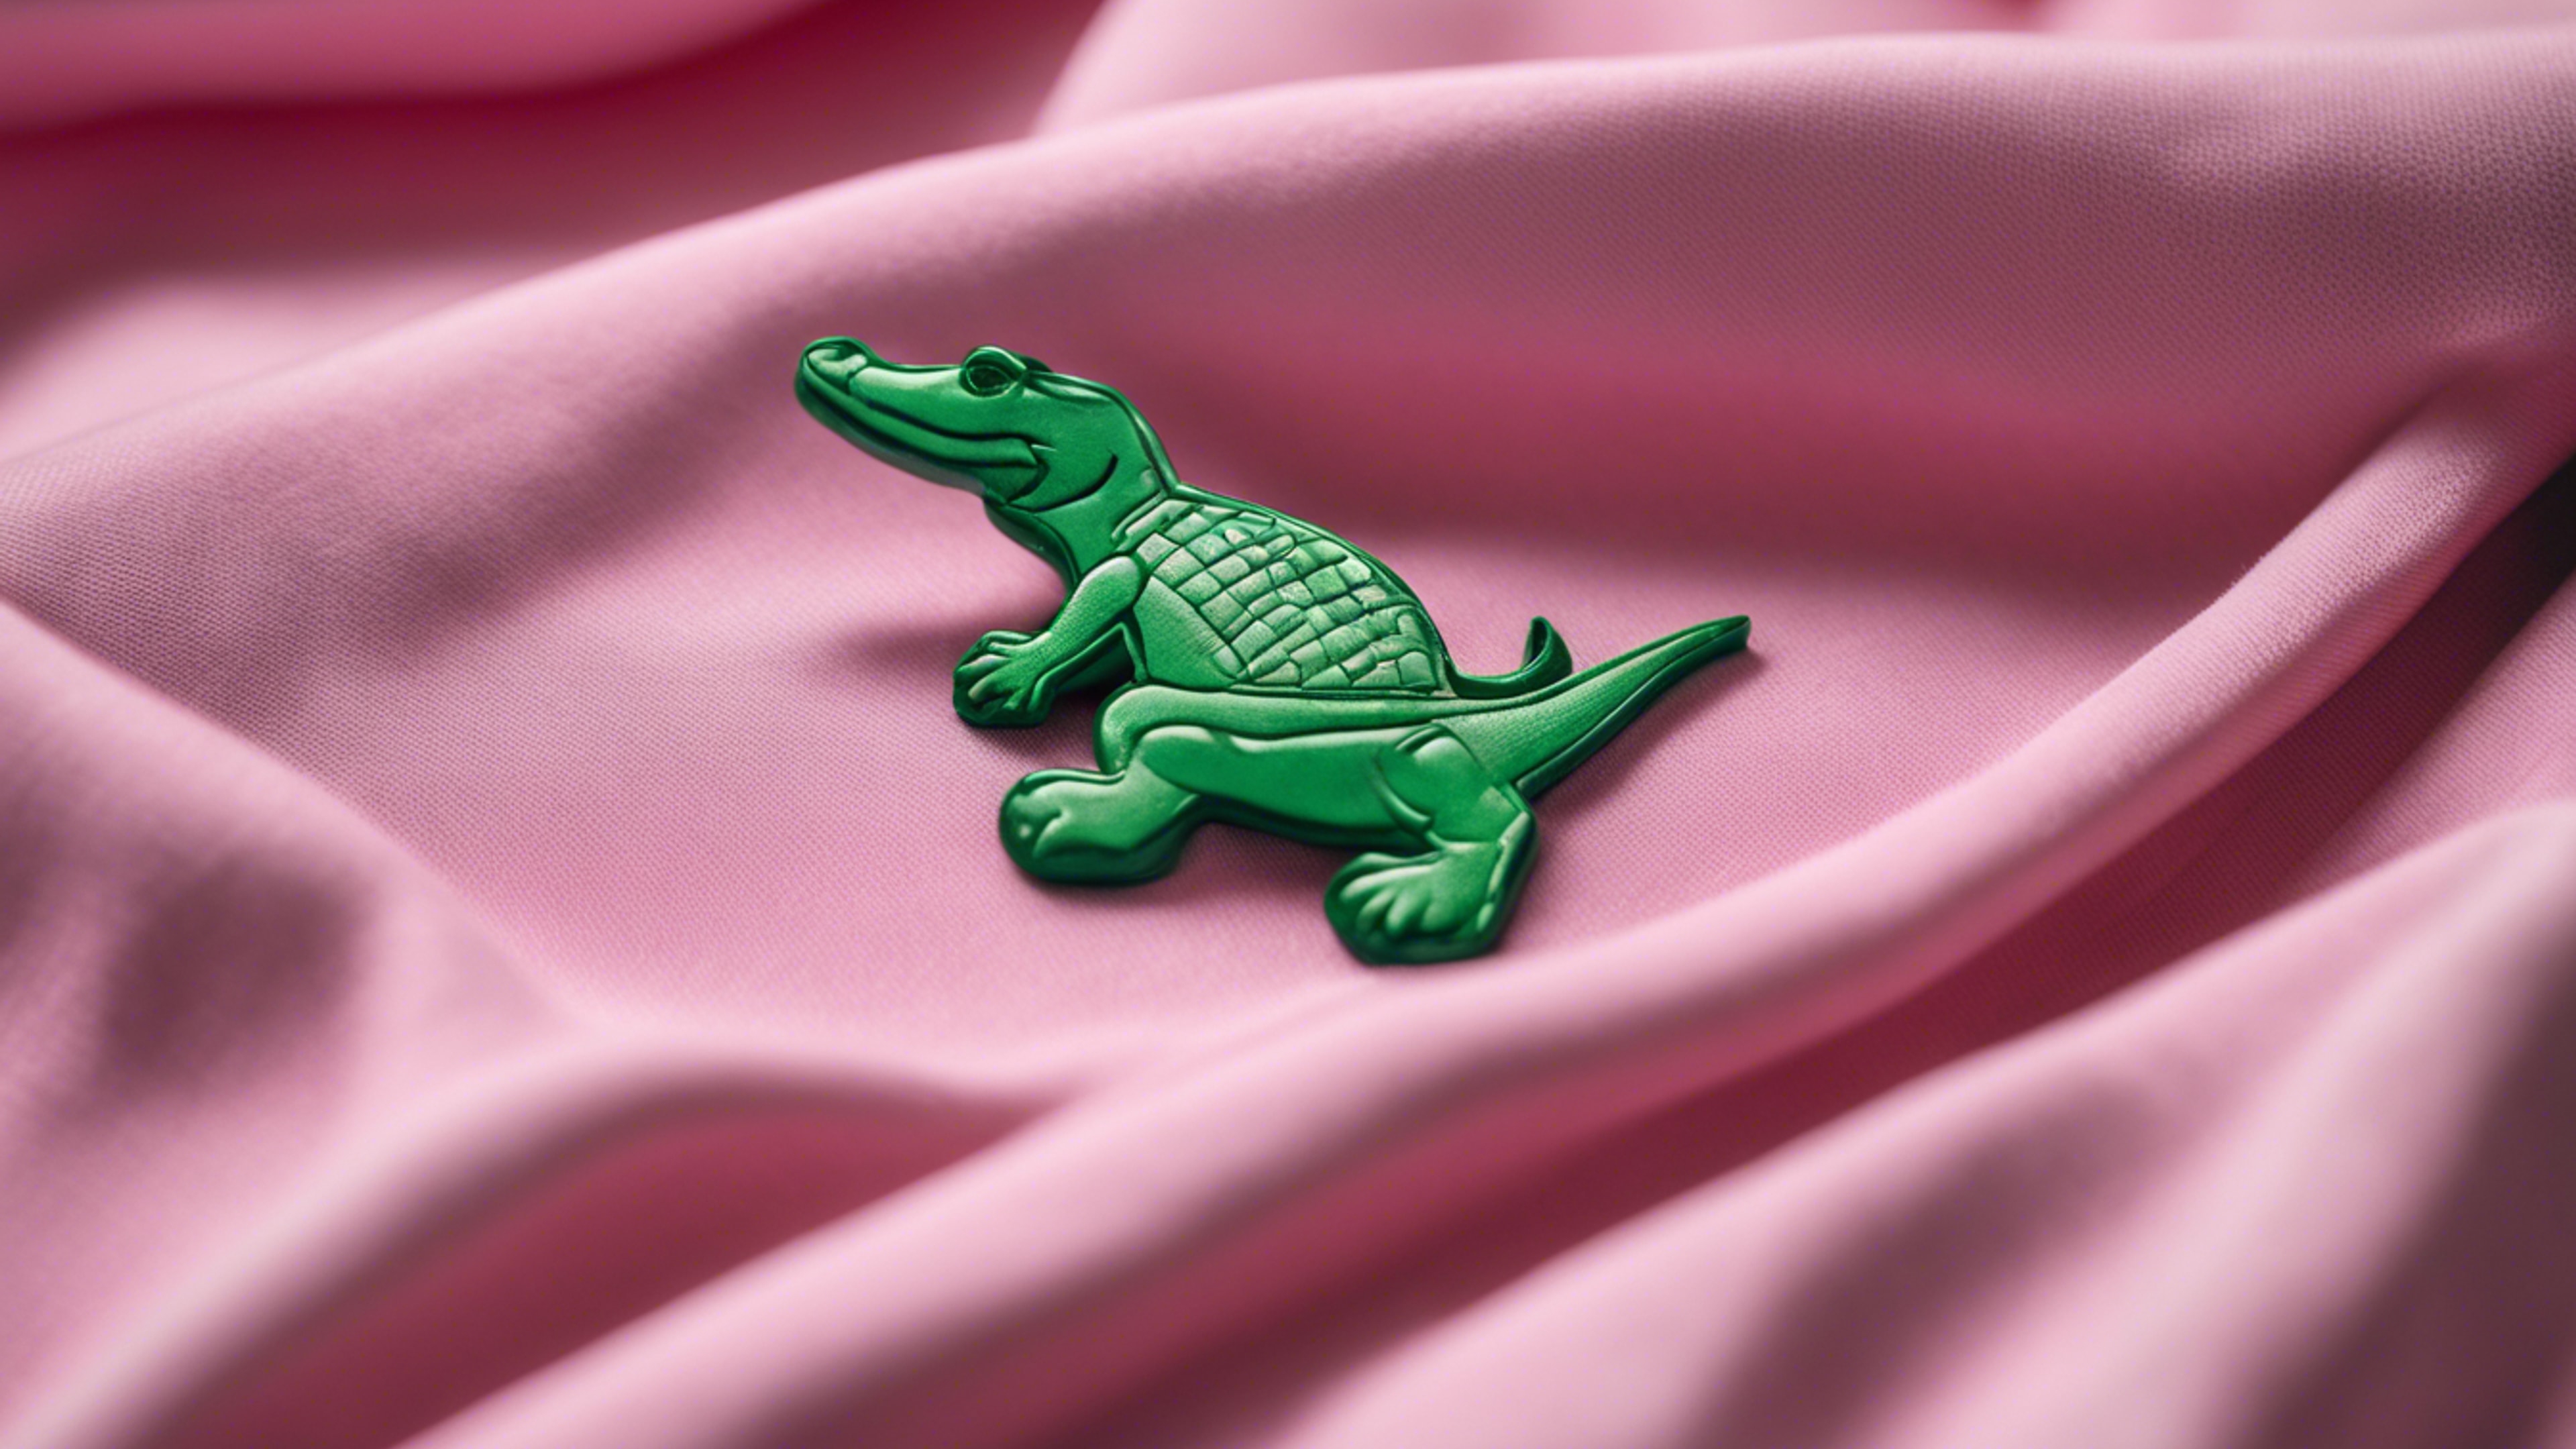 A pink polo shirt with a green alligator logo, folded neatly on a bed. Wallpaper[63d9ff960abf421e89a8]